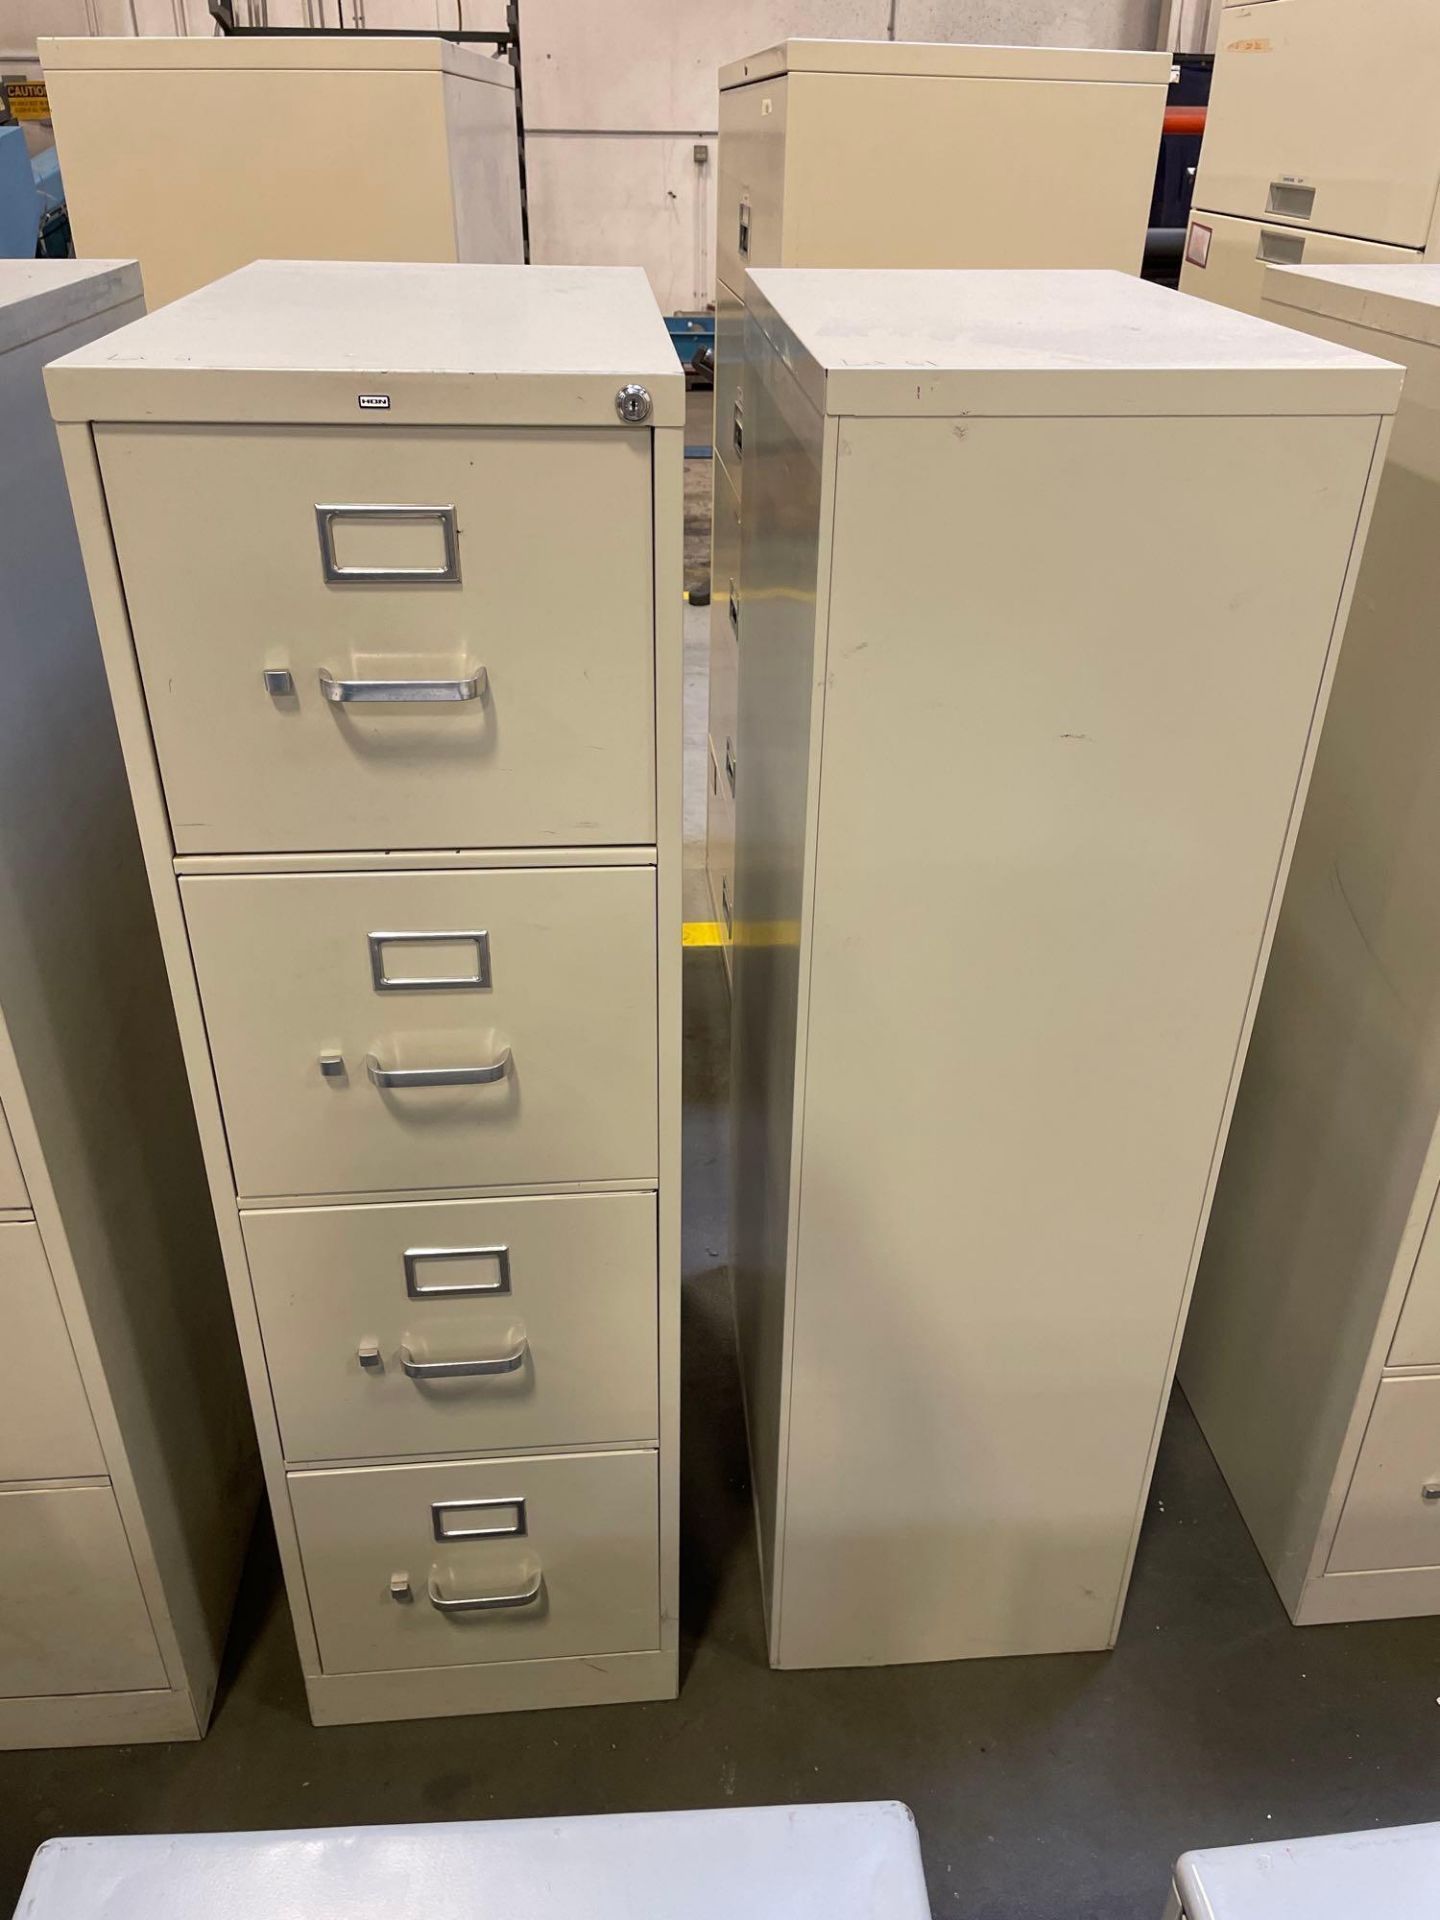 Lot of 5 Hon 4 Drawer File Cabinets: 25" X 15" X 52" - Image 4 of 5